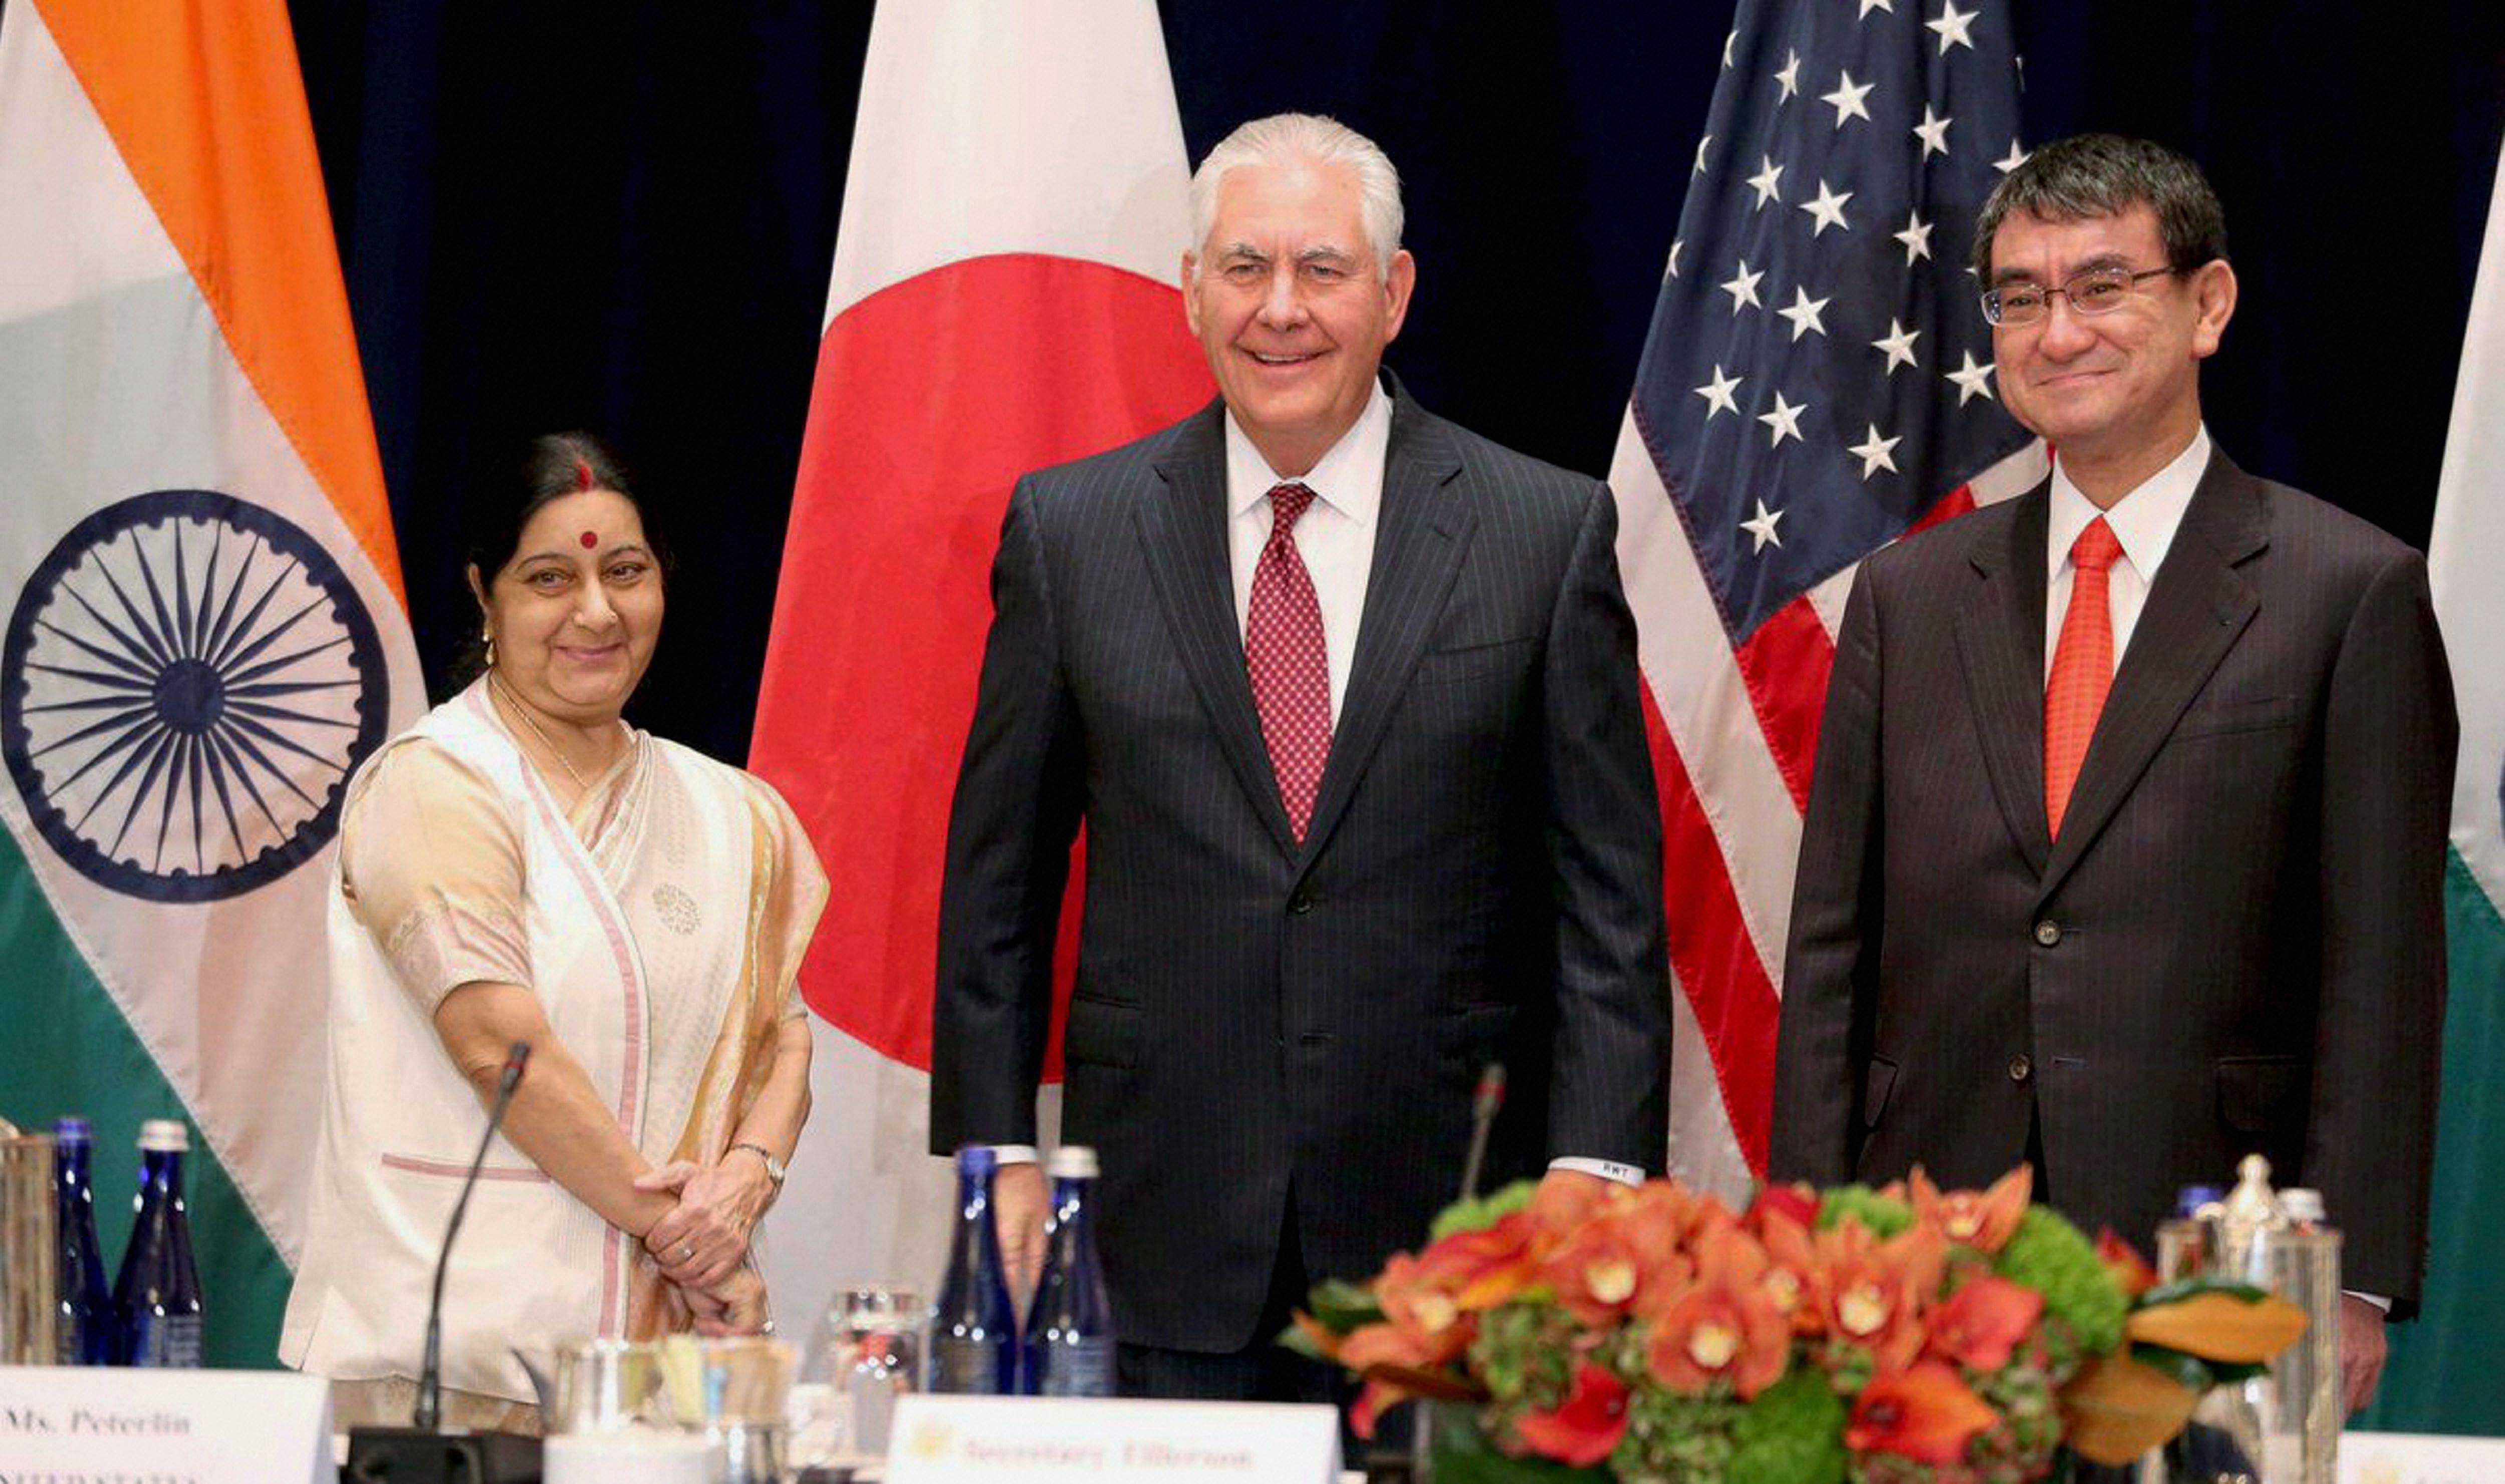 U.S. Secretary of State Rex Tillerson, center, stands with Indian External Affairs Minister Sushma Swaraj, left, and and Japanese Foreign Minister Taro Kono, at the Palace Hotel in New York on Monday. PTI Photo